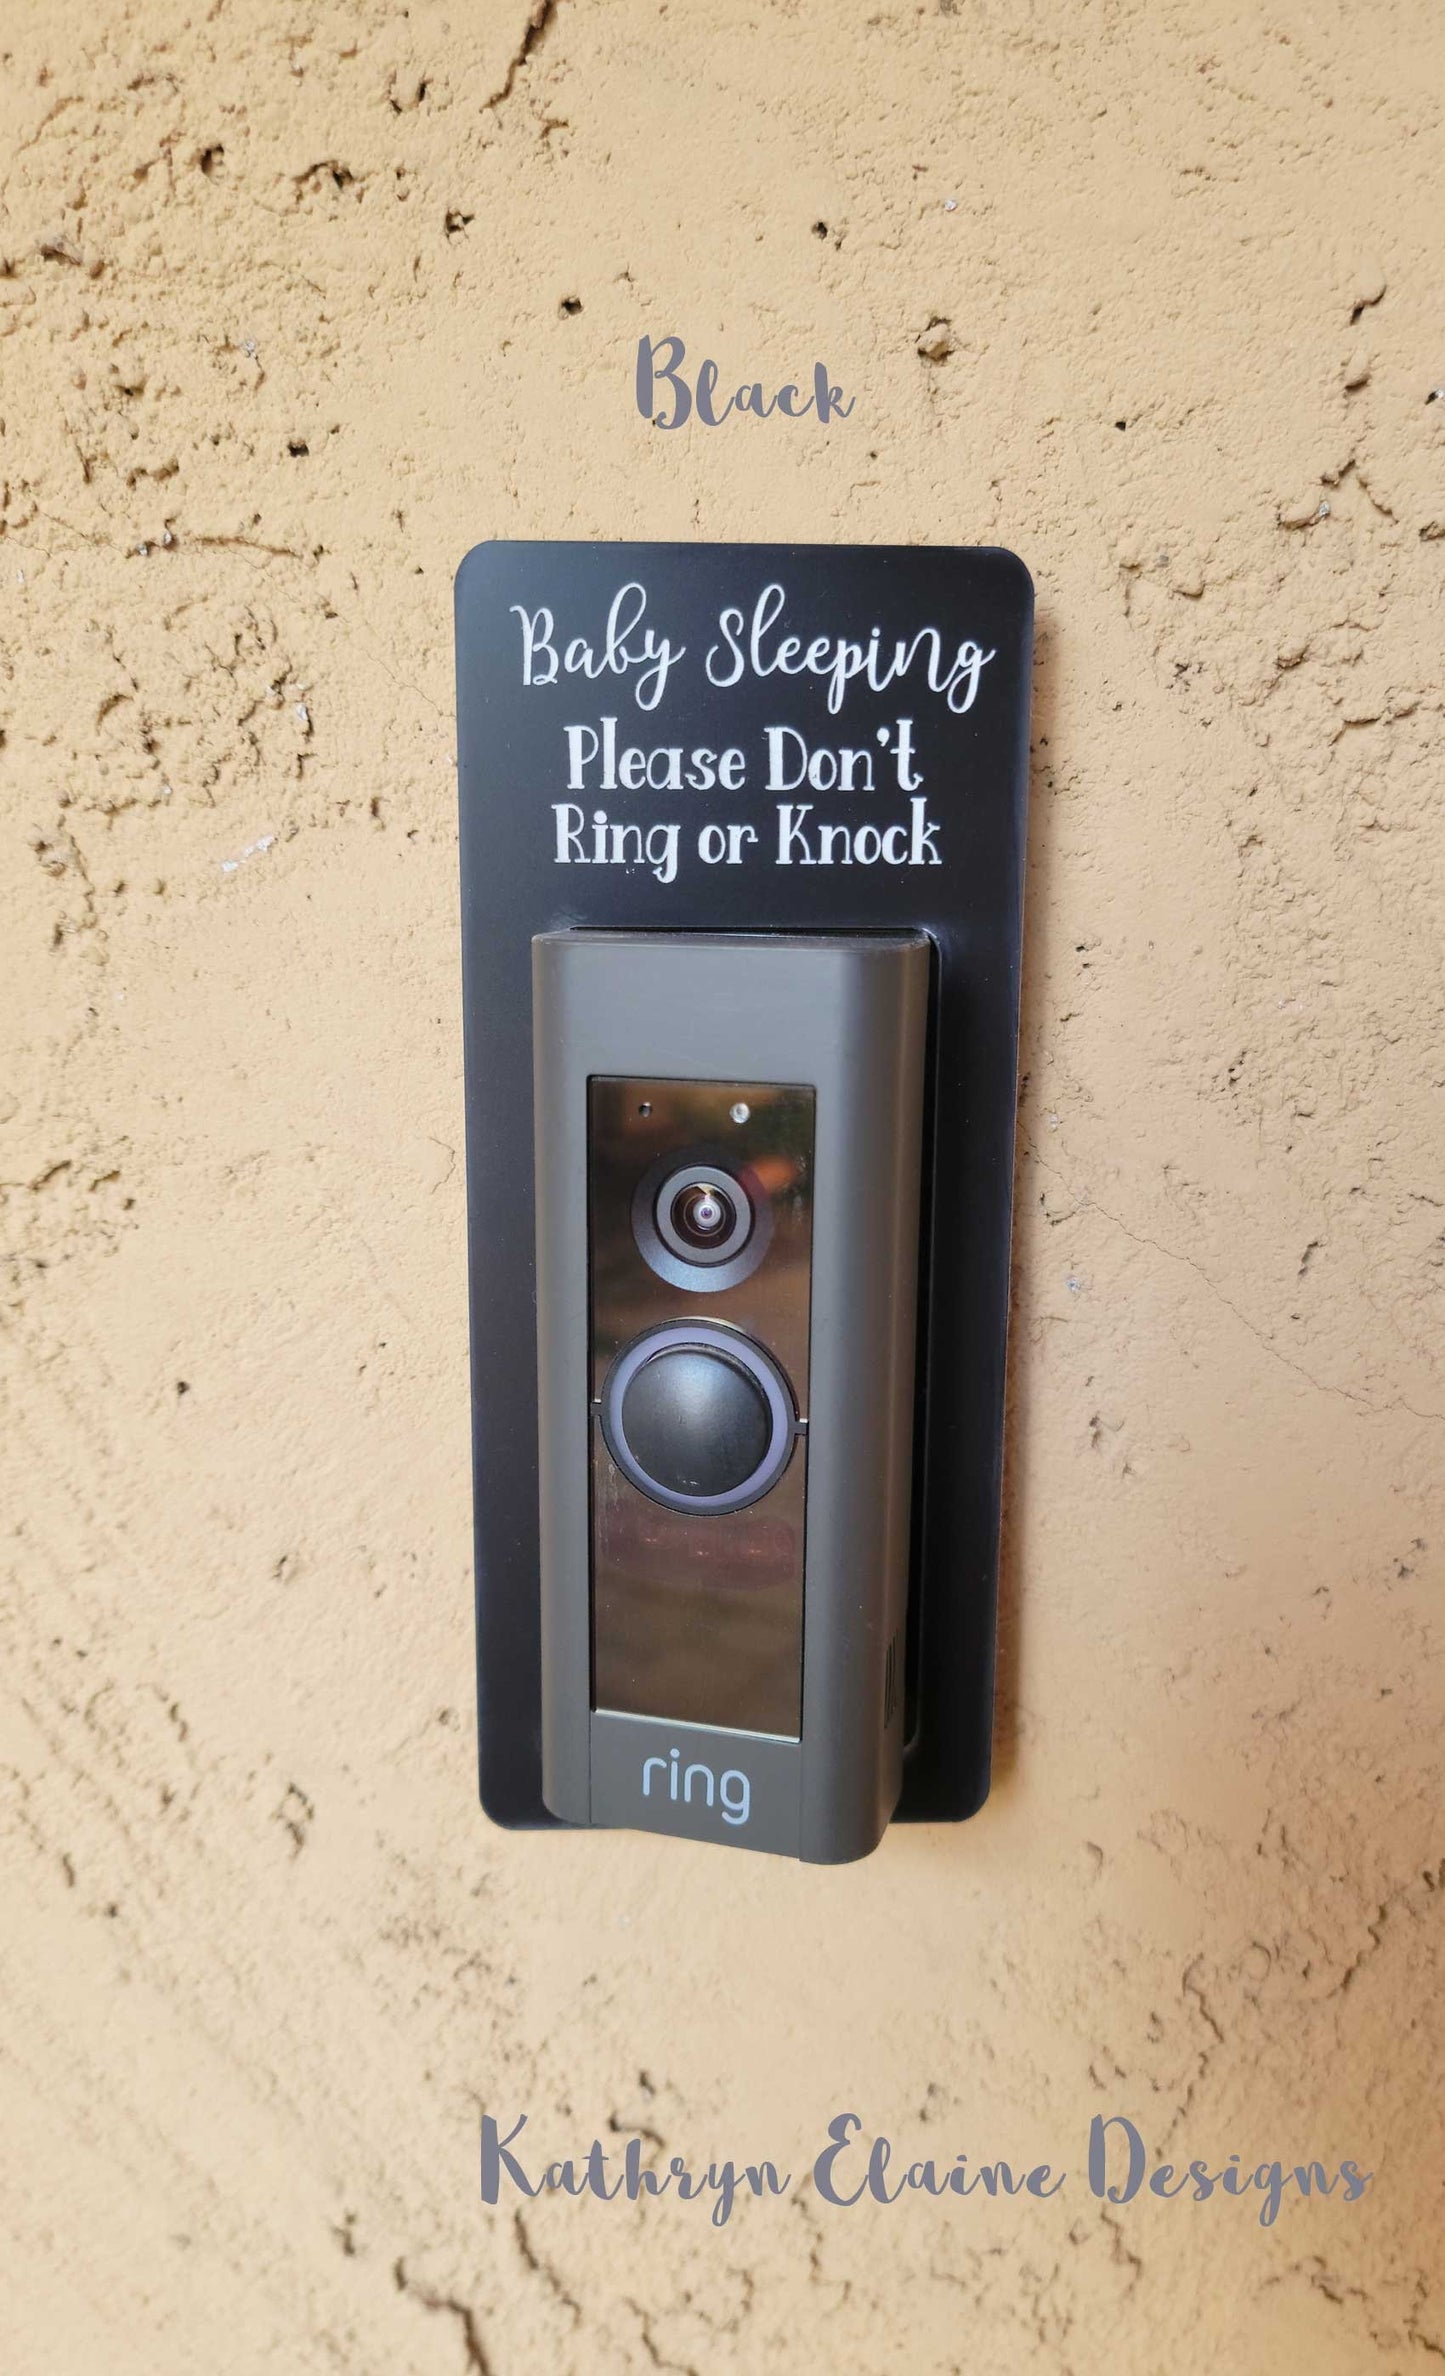 Black laminate rectangle around Ring doorbell that says Baby Sleeping Please Don't Ring or Knock in white lettering against tan stucco background